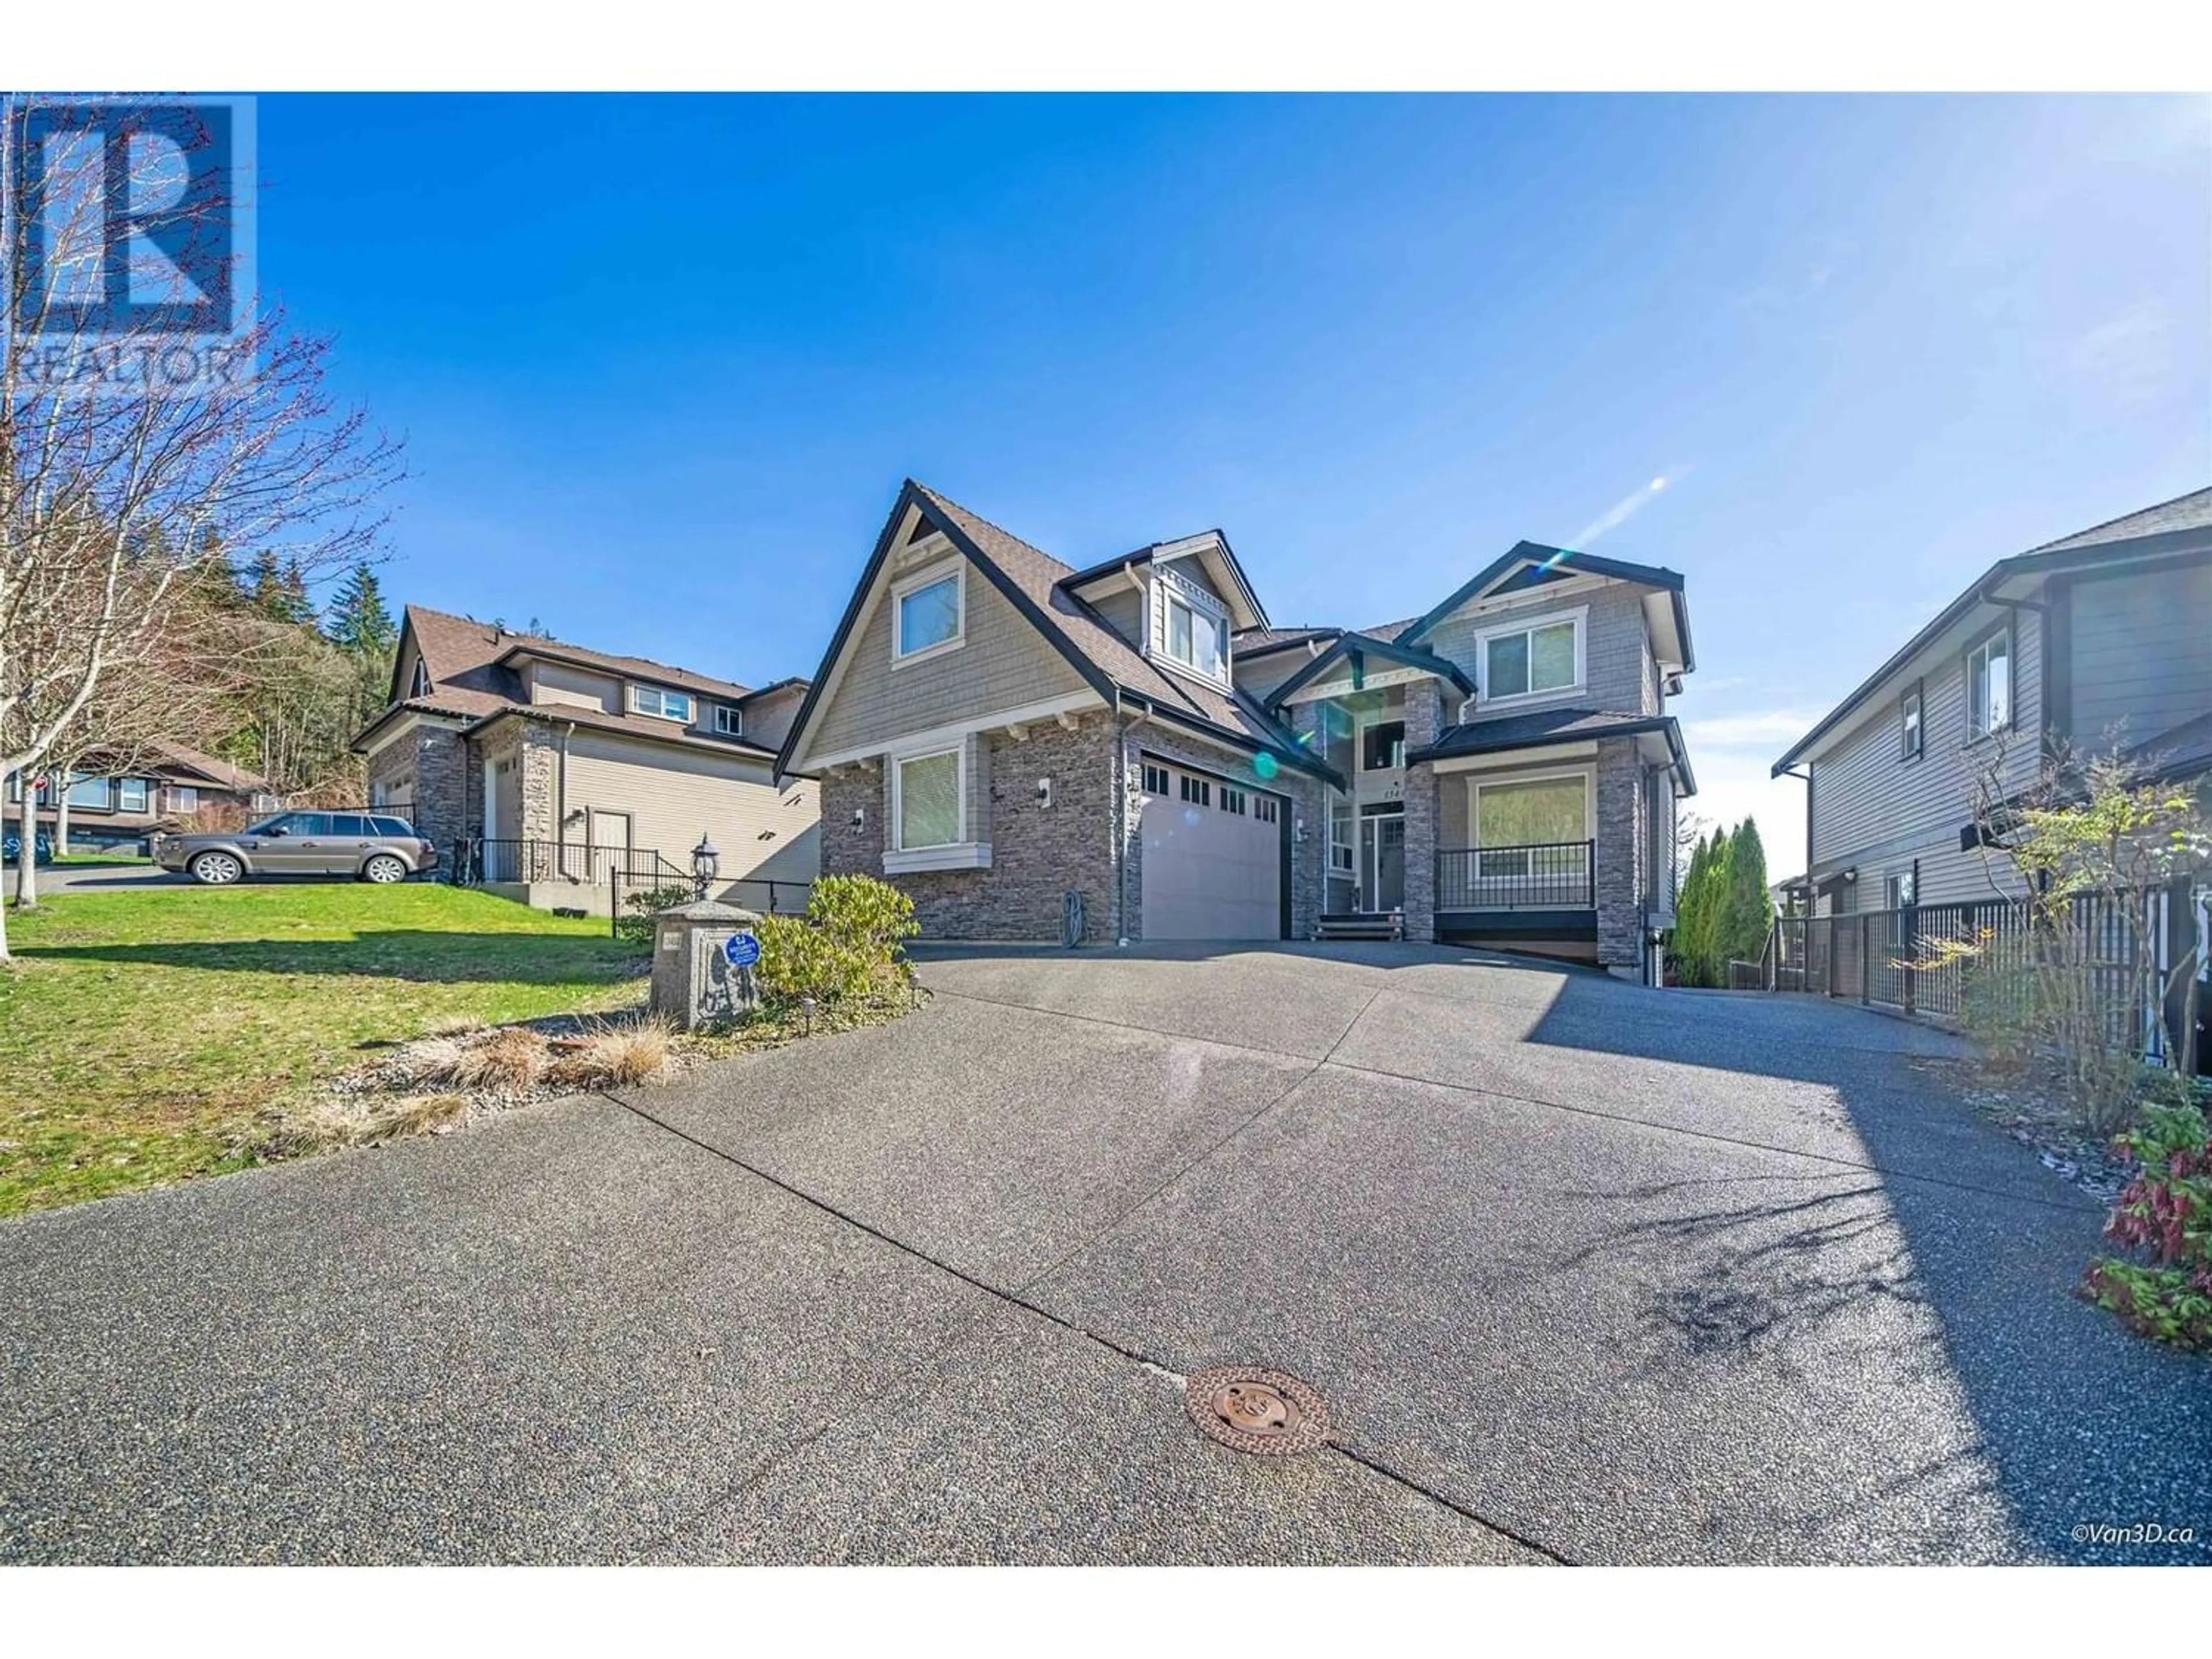 Frontside or backside of a home for 13492 235 STREET, Maple Ridge British Columbia V4R2W3